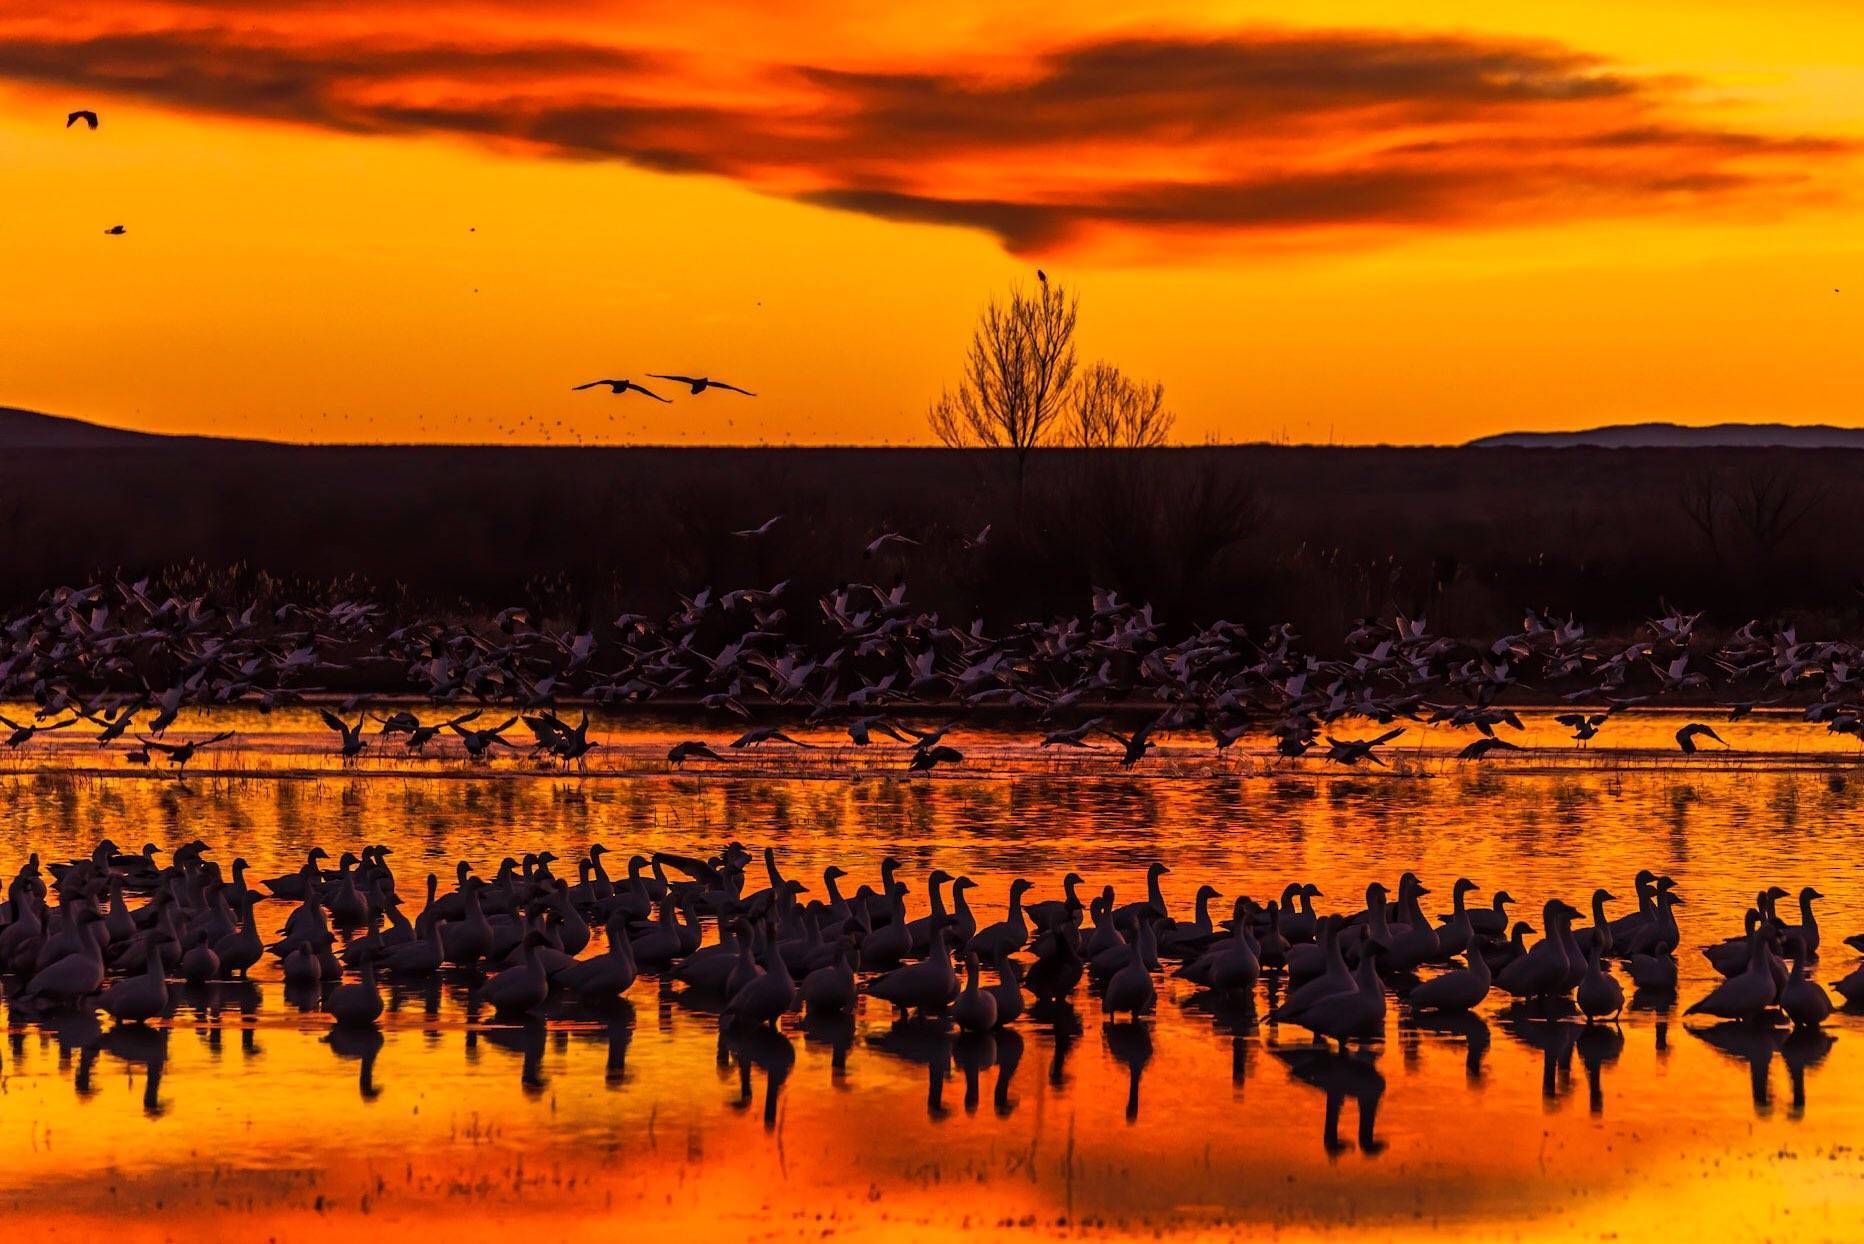 2nd Place A colorful sky moments before sunrise at Bosque del Apache National Wildlife Refuge by Michael Ryno Photo @mnryno34